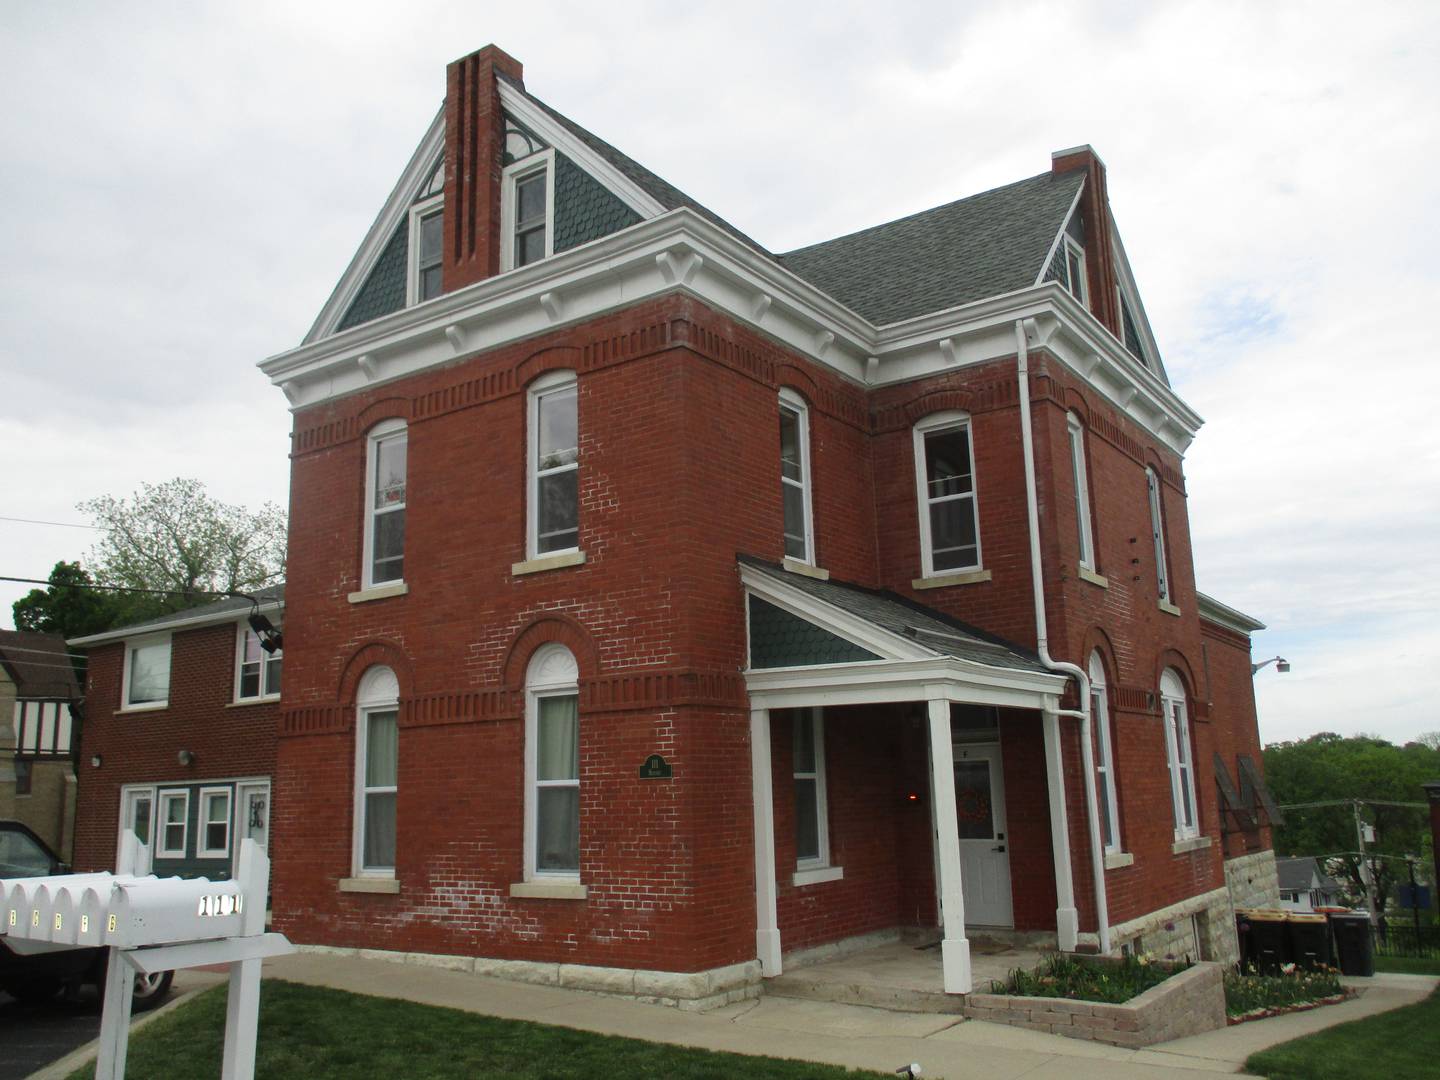 The Historic Kendall County Jail and Sheriff's Residence at 111 W. Madison St. in Yorkville. (Mark Foster -- mfoster@shawmedia.com)